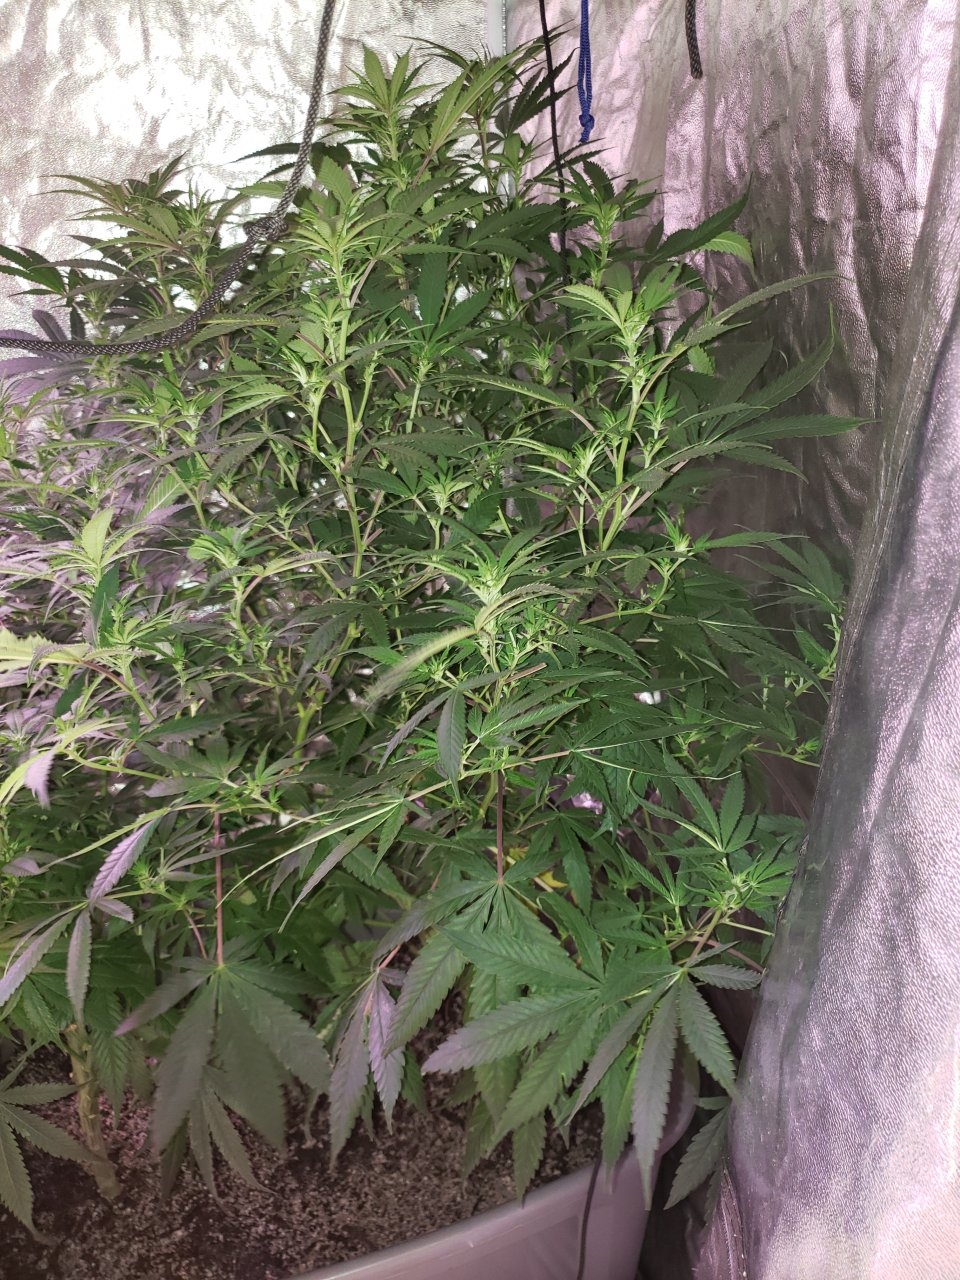 HB Sweet Tooth tall pheno